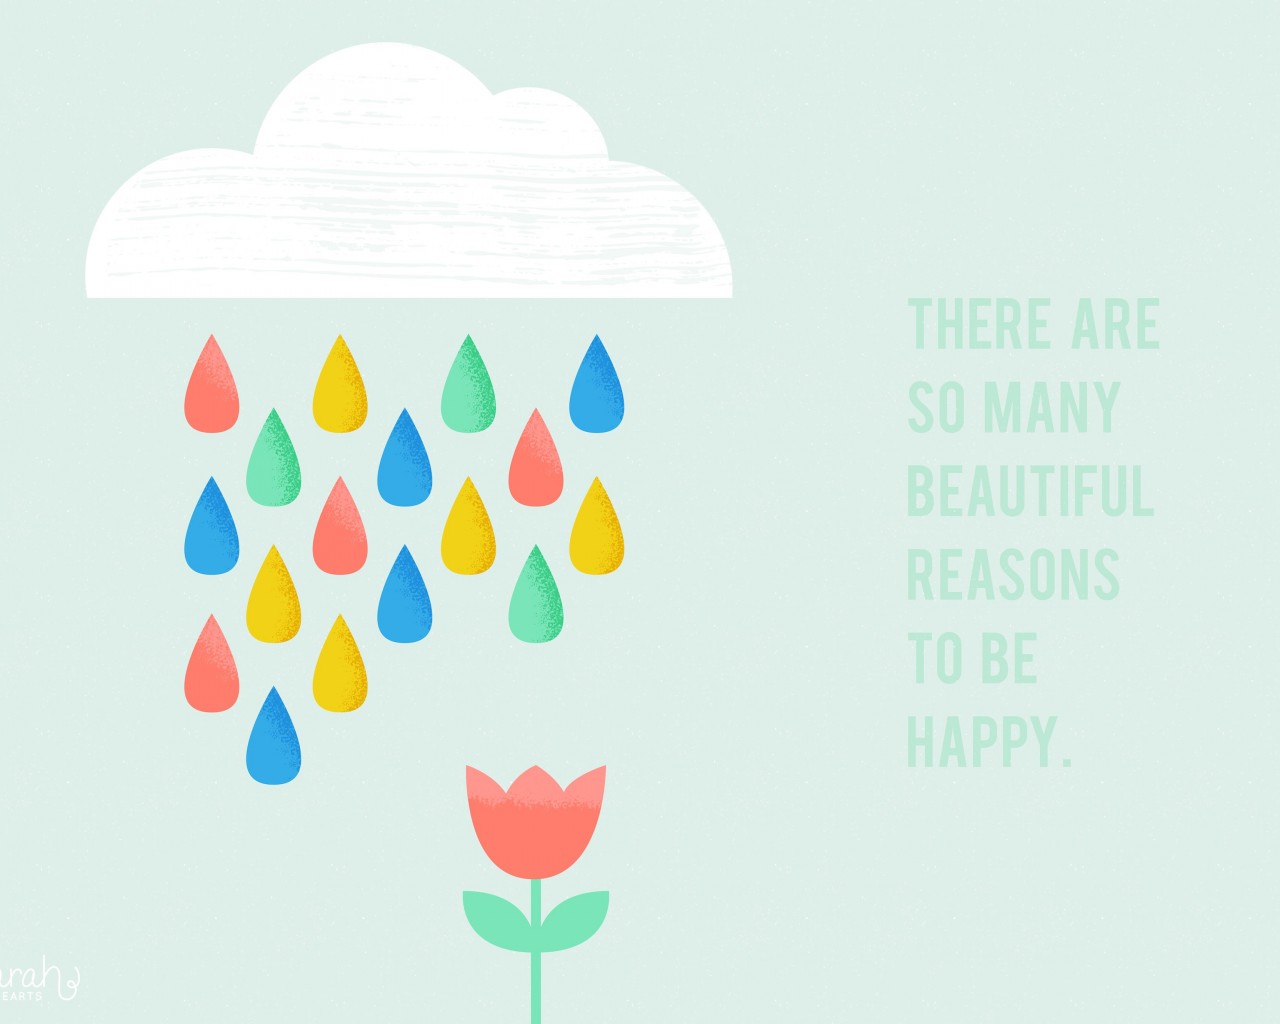 There are so many reasons to be happy Wallpaper for Desktop 1280x1024